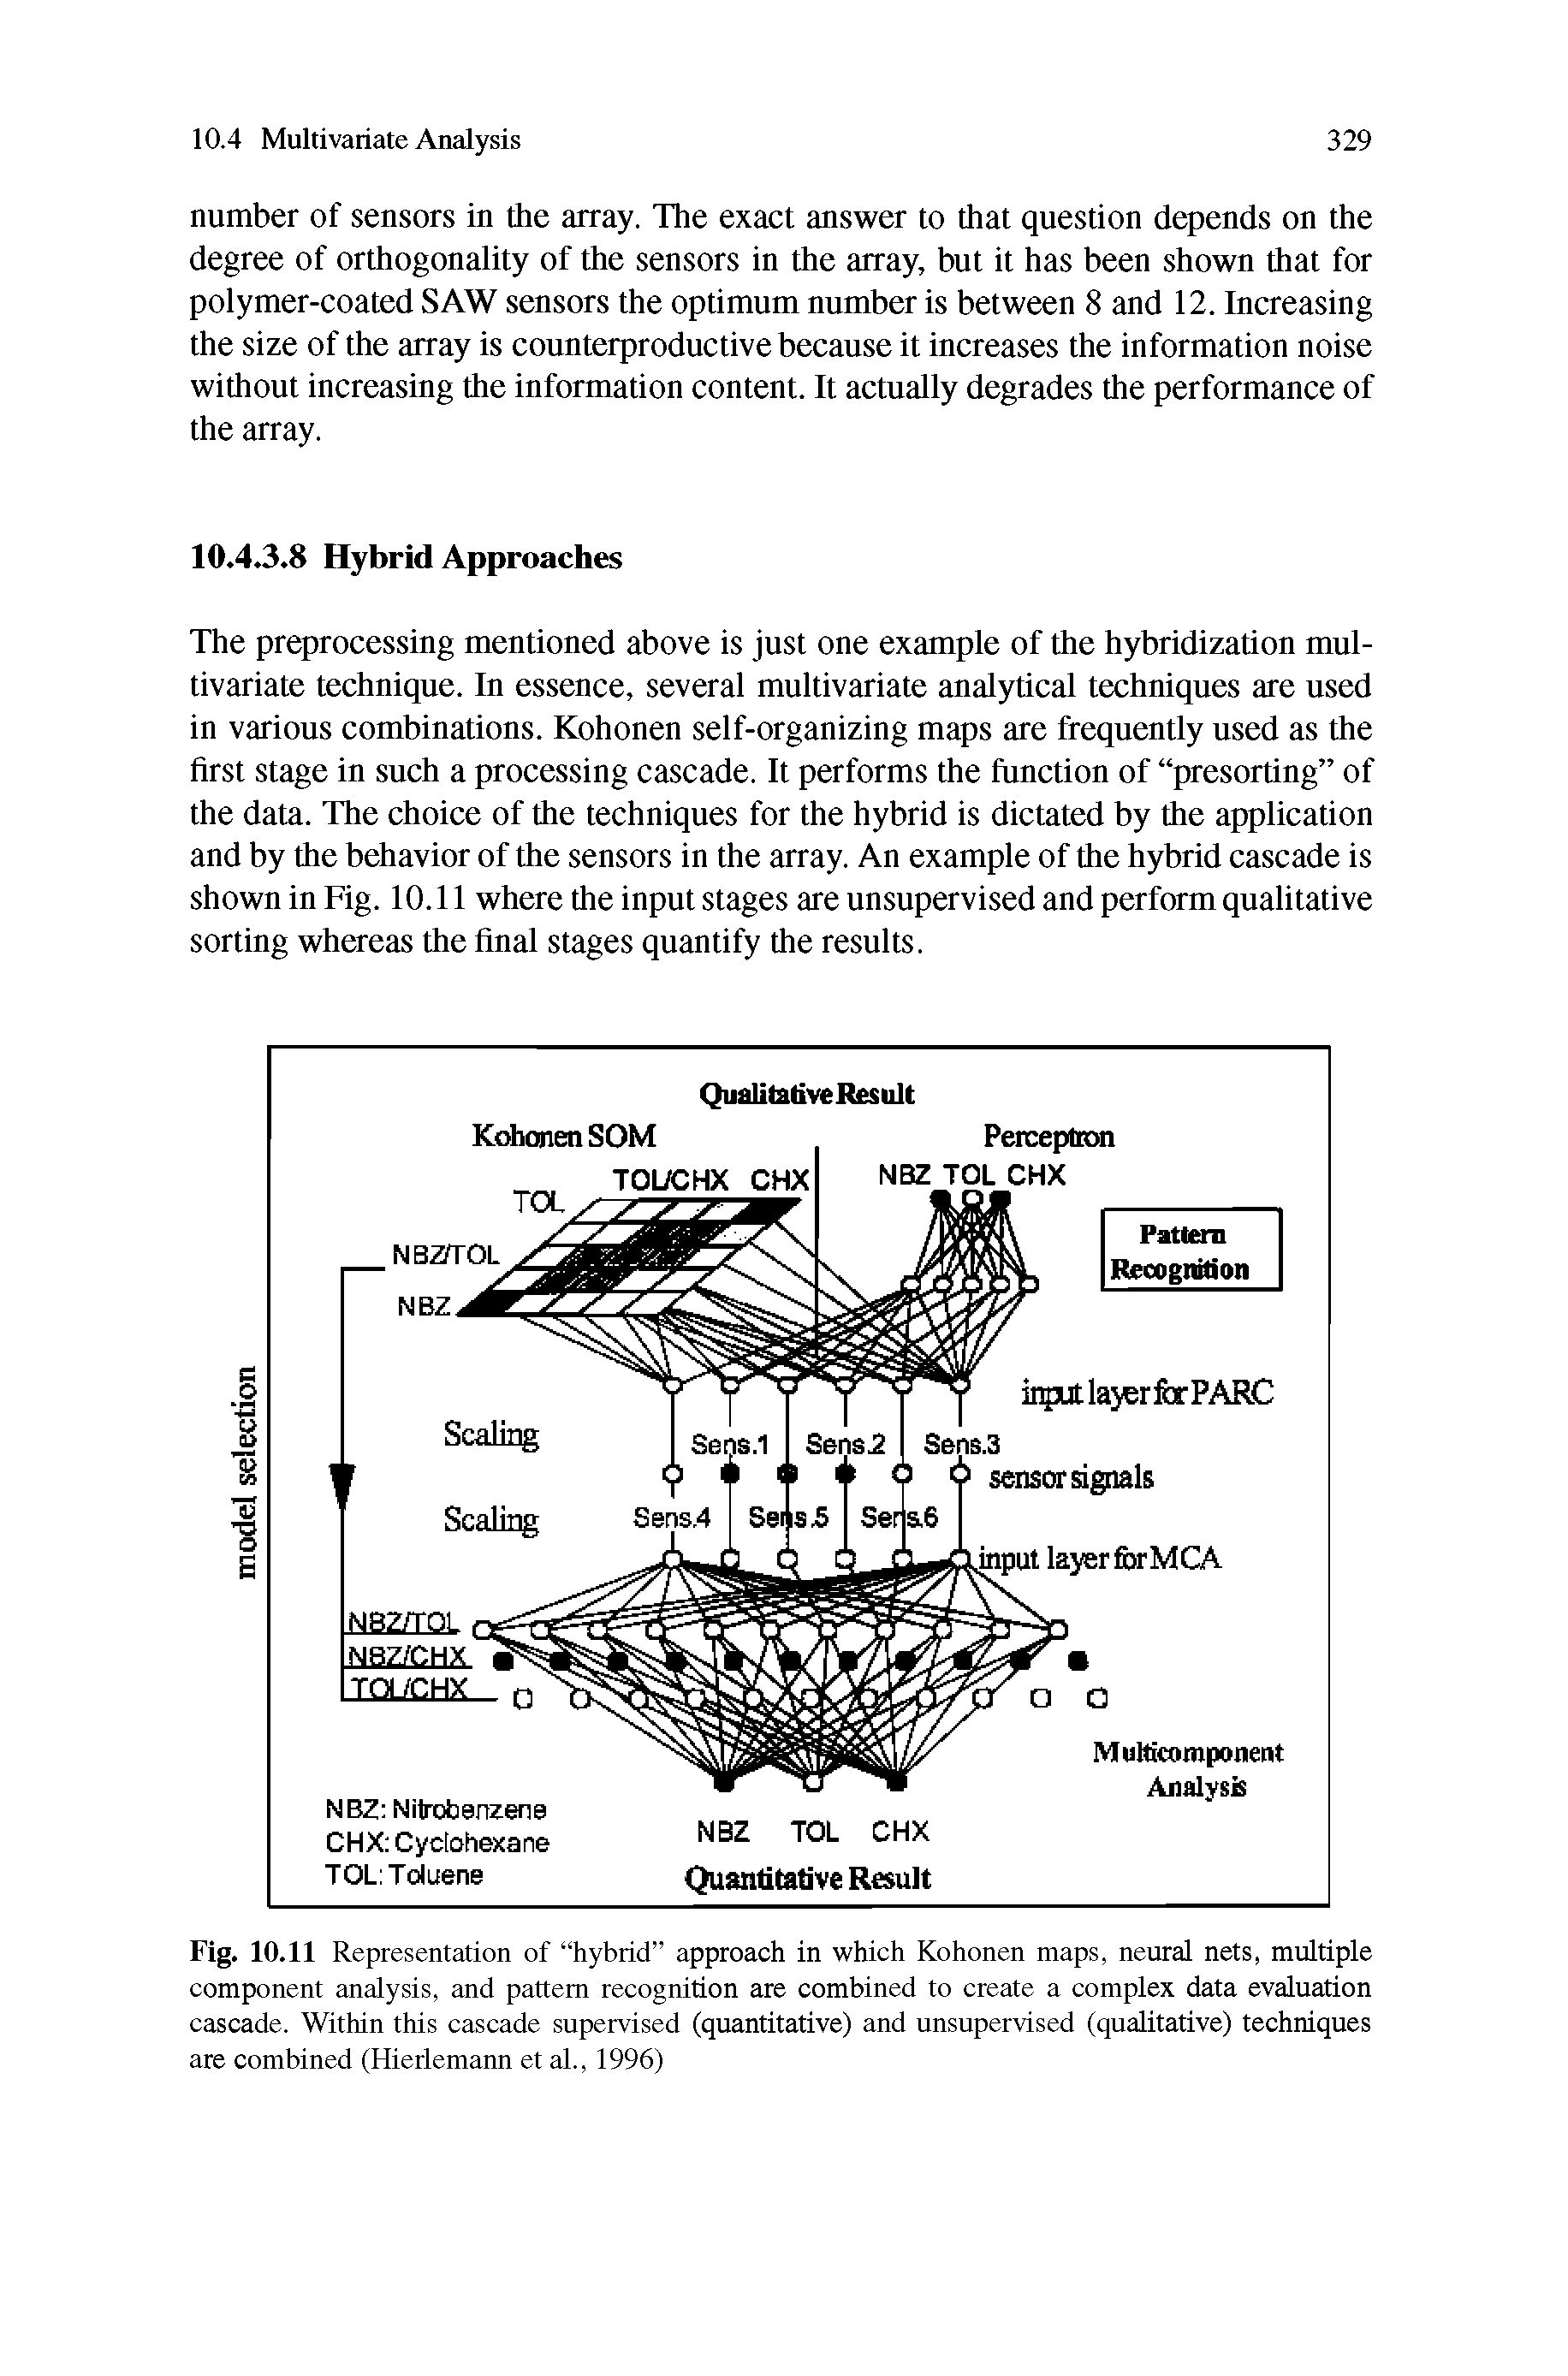 Fig. 10.11 Representation of hybrid approach in which Kohonen maps, neural nets, multiple component analysis, and pattern recognition are combined to create a complex data evaluation cascade. Within this cascade supervised (quantitative) and unsupervised (qualitative) techniques are combined (Hierlemann et al., 1996)...